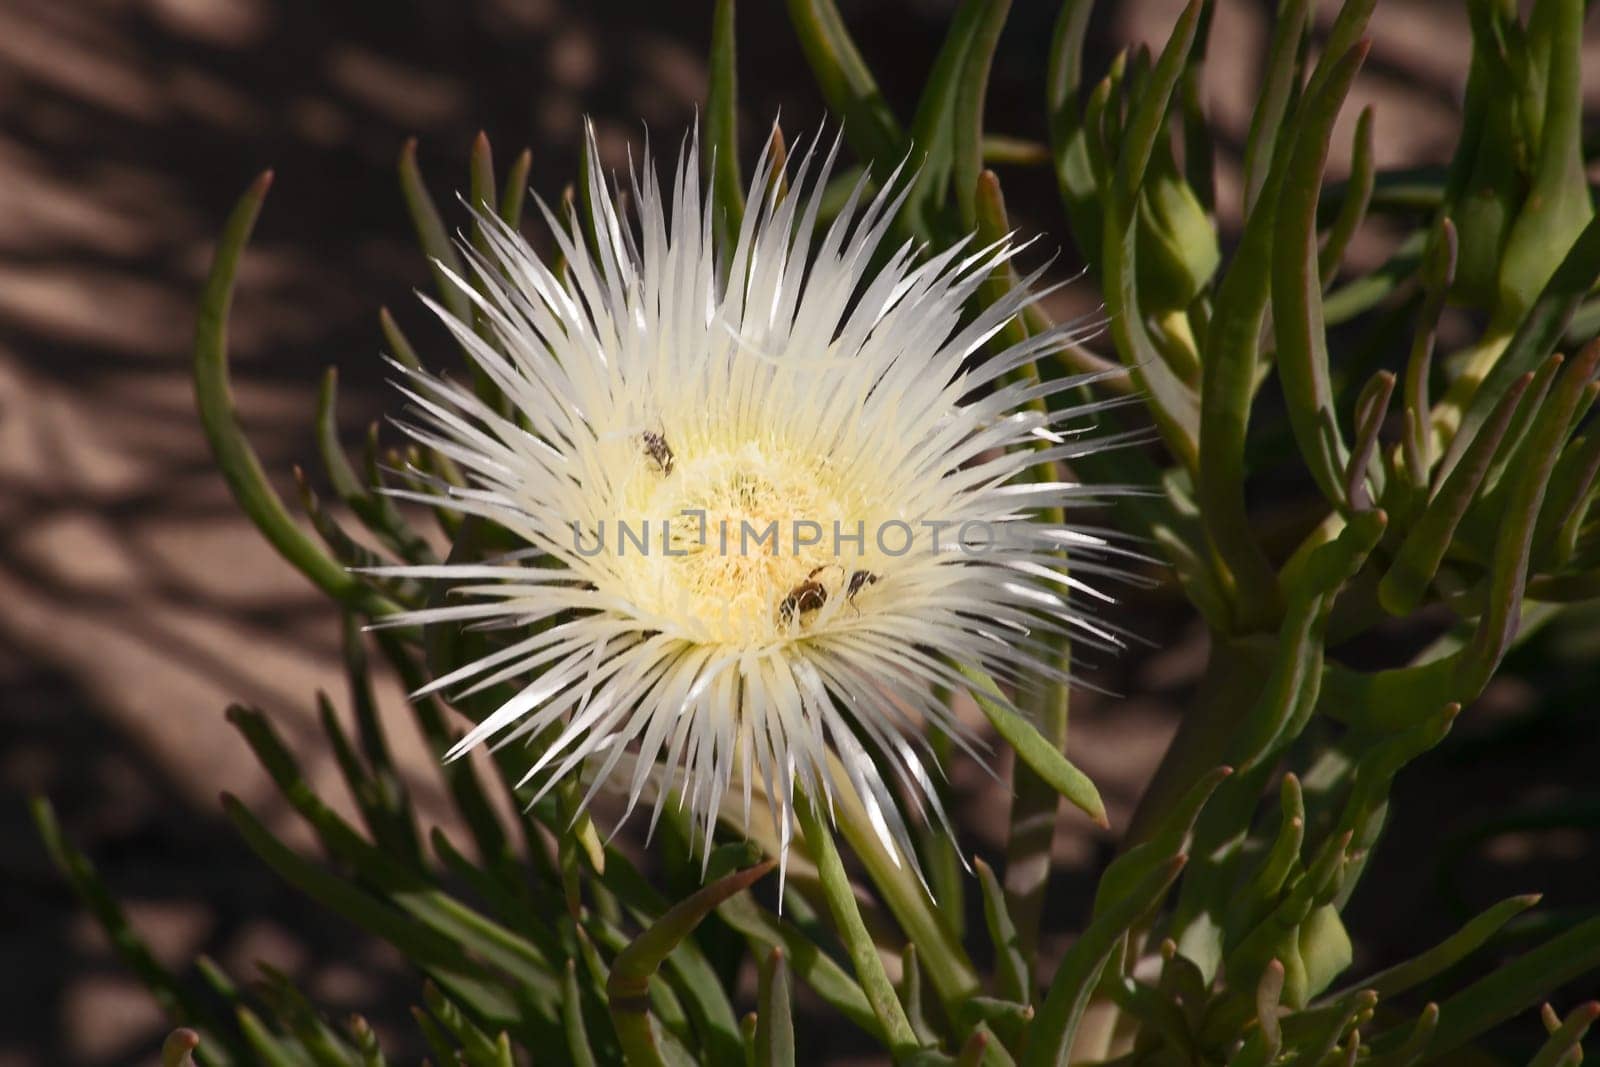 Beatles busy pollinating a white Lampranthus flower in Namaqualand